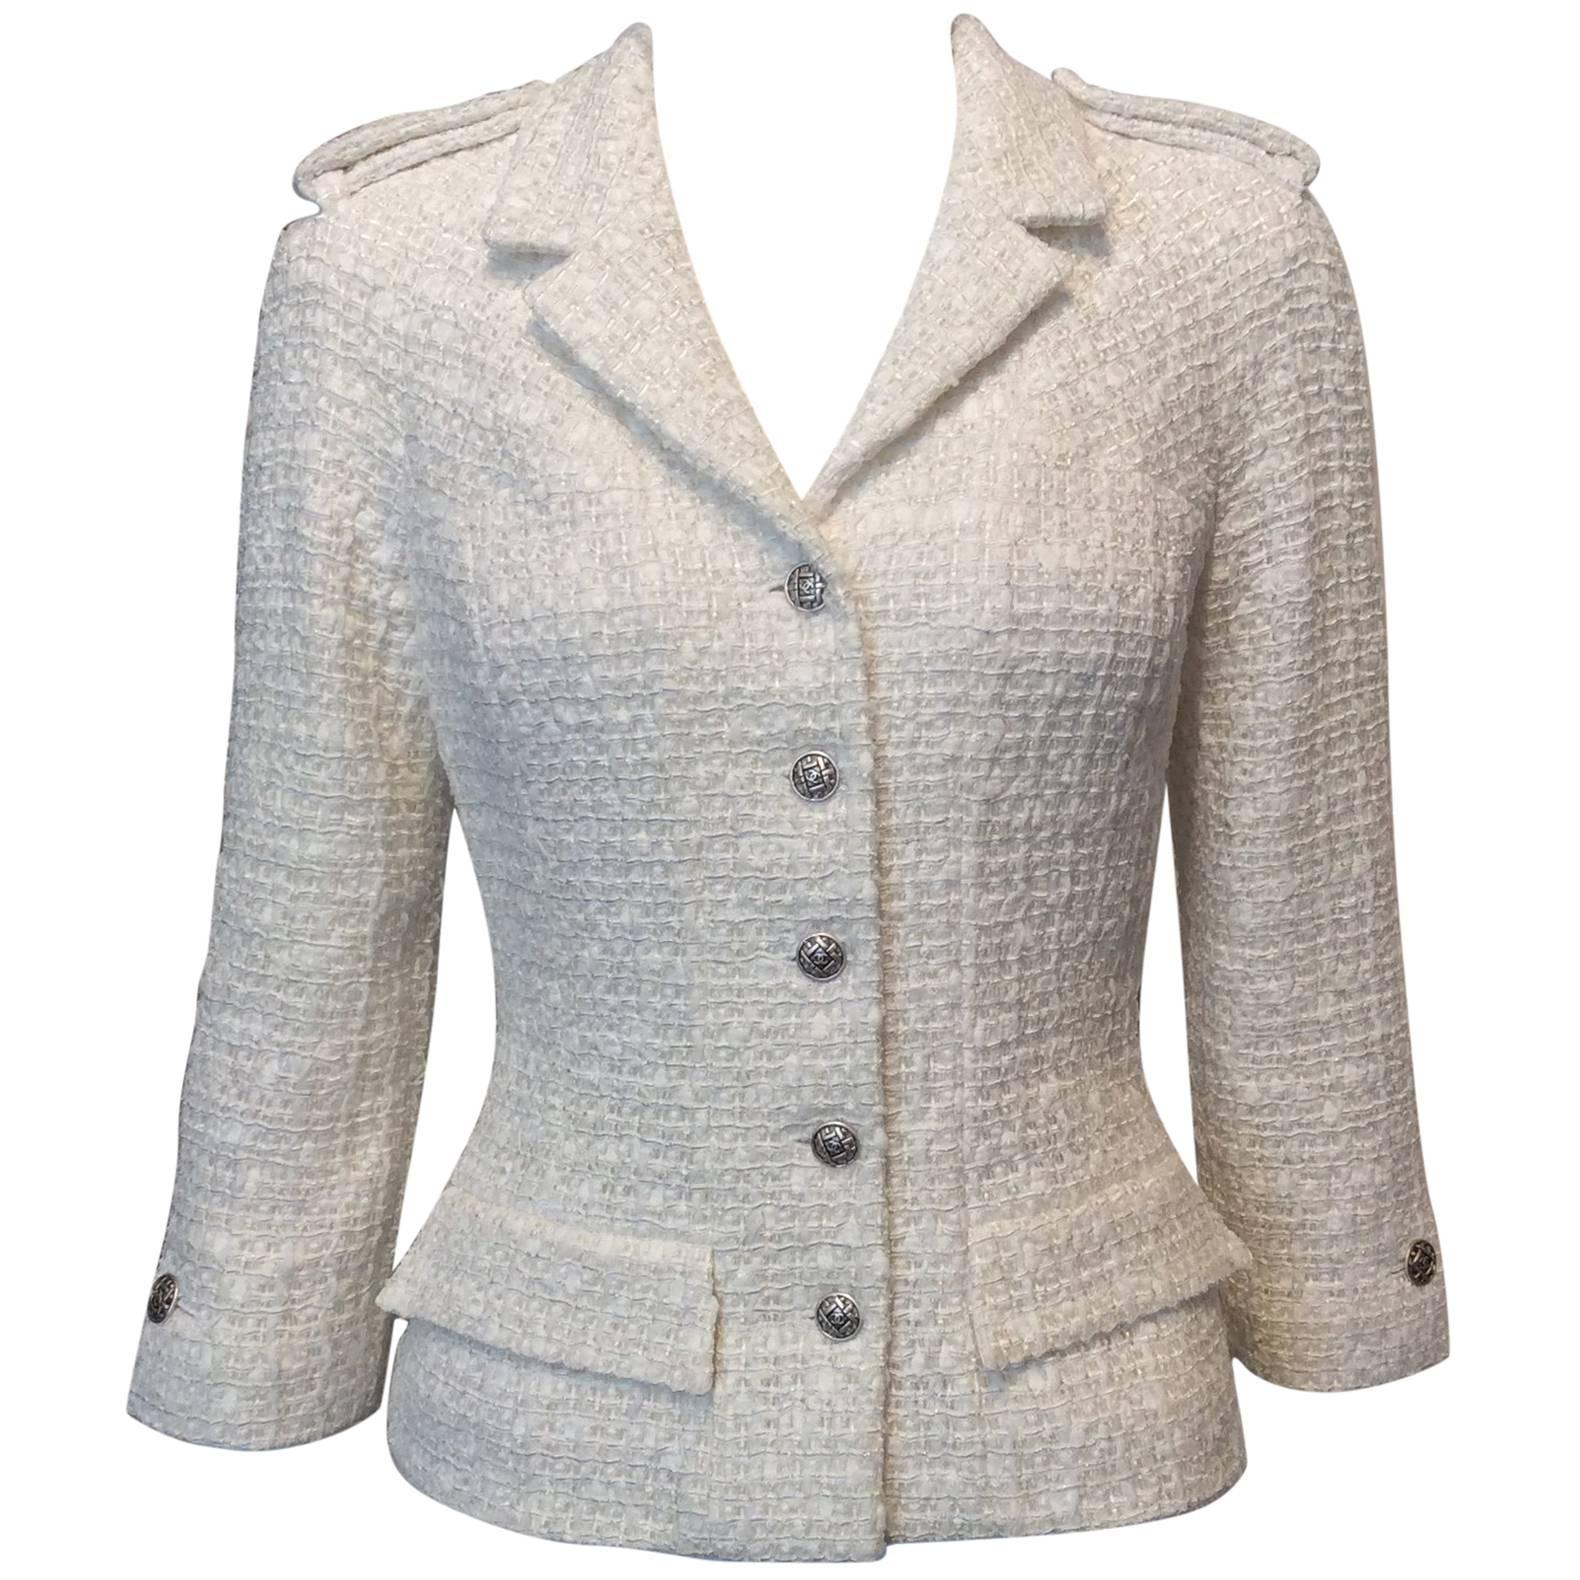 Chanel Cream and Silver Accented Tweed Jacket With Silver Buttons Sz38/Us6